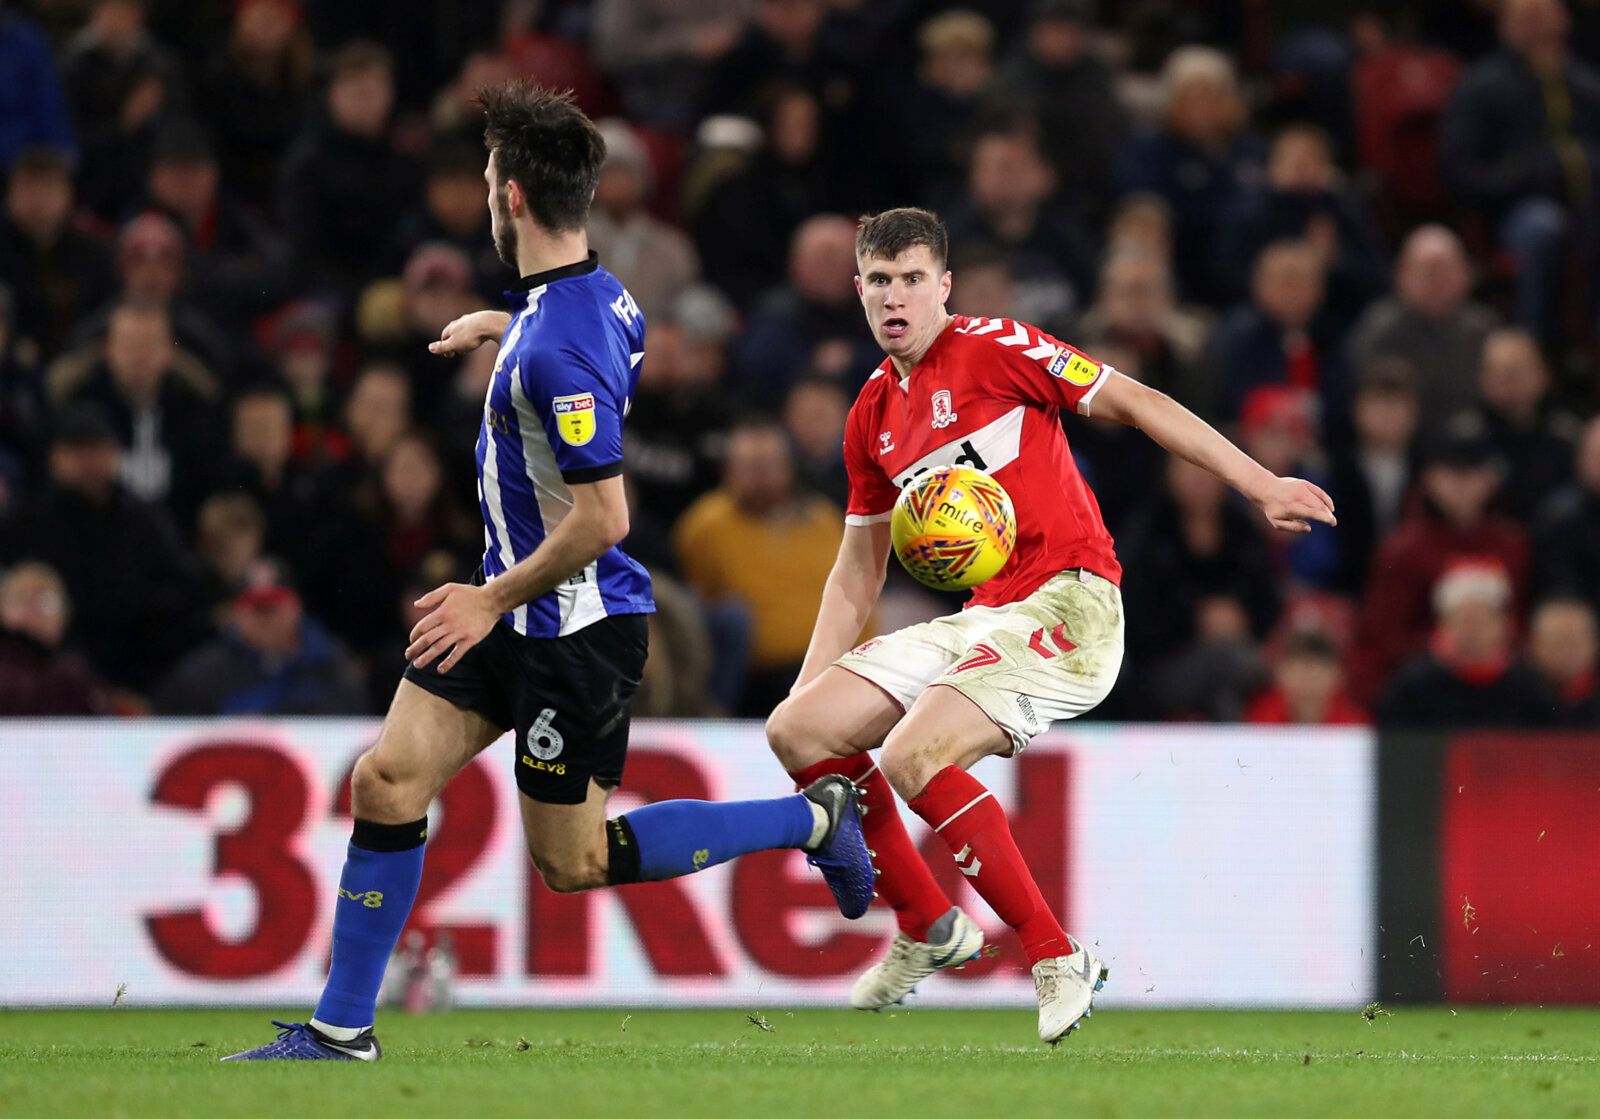 Soccer Football - Championship - Middlesbrough v Sheffield Wednesday - Riverside Stadium, Middlesbrough, Britain - December 26, 2018   Middlesbrough's Paddy McNair in action with Sheffield Wednesday's Morgan Fox   Action Images/John Clifton    EDITORIAL USE ONLY. No use with unauthorized audio, video, data, fixture lists, club/league logos or 